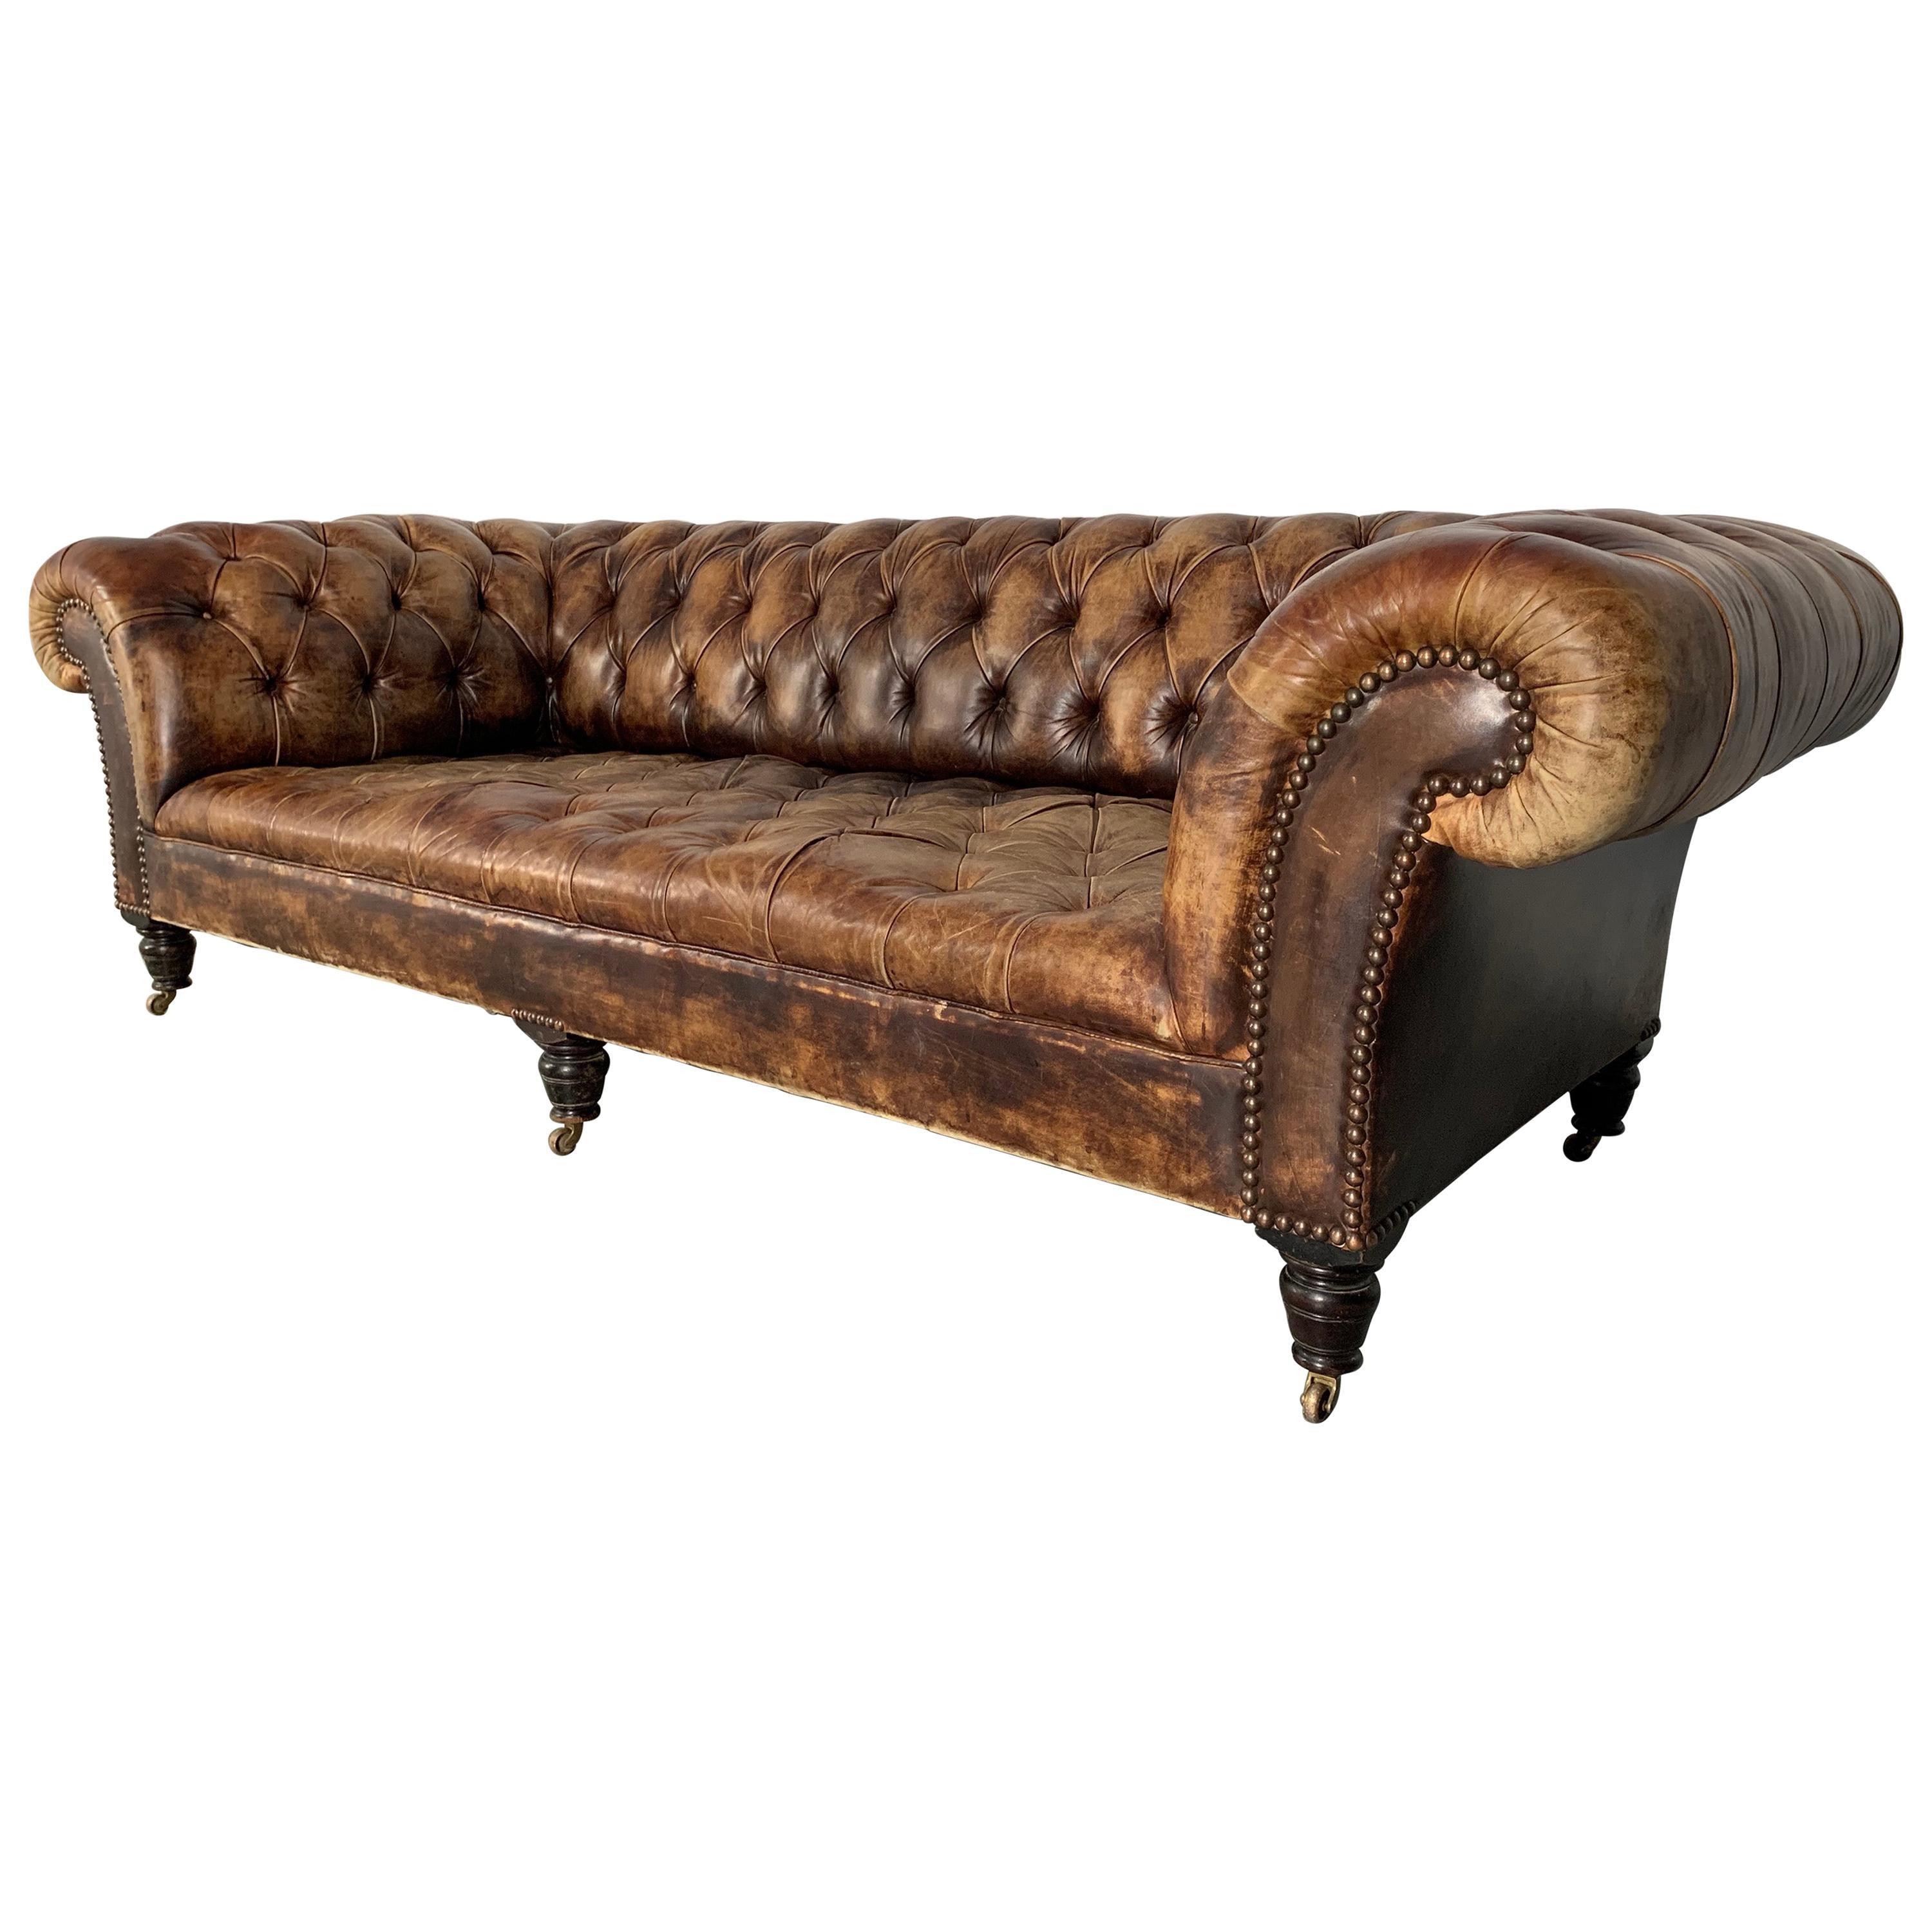 George Smith "Early Victorian Chesterfield " Buttoned Sofa in Brown Leather